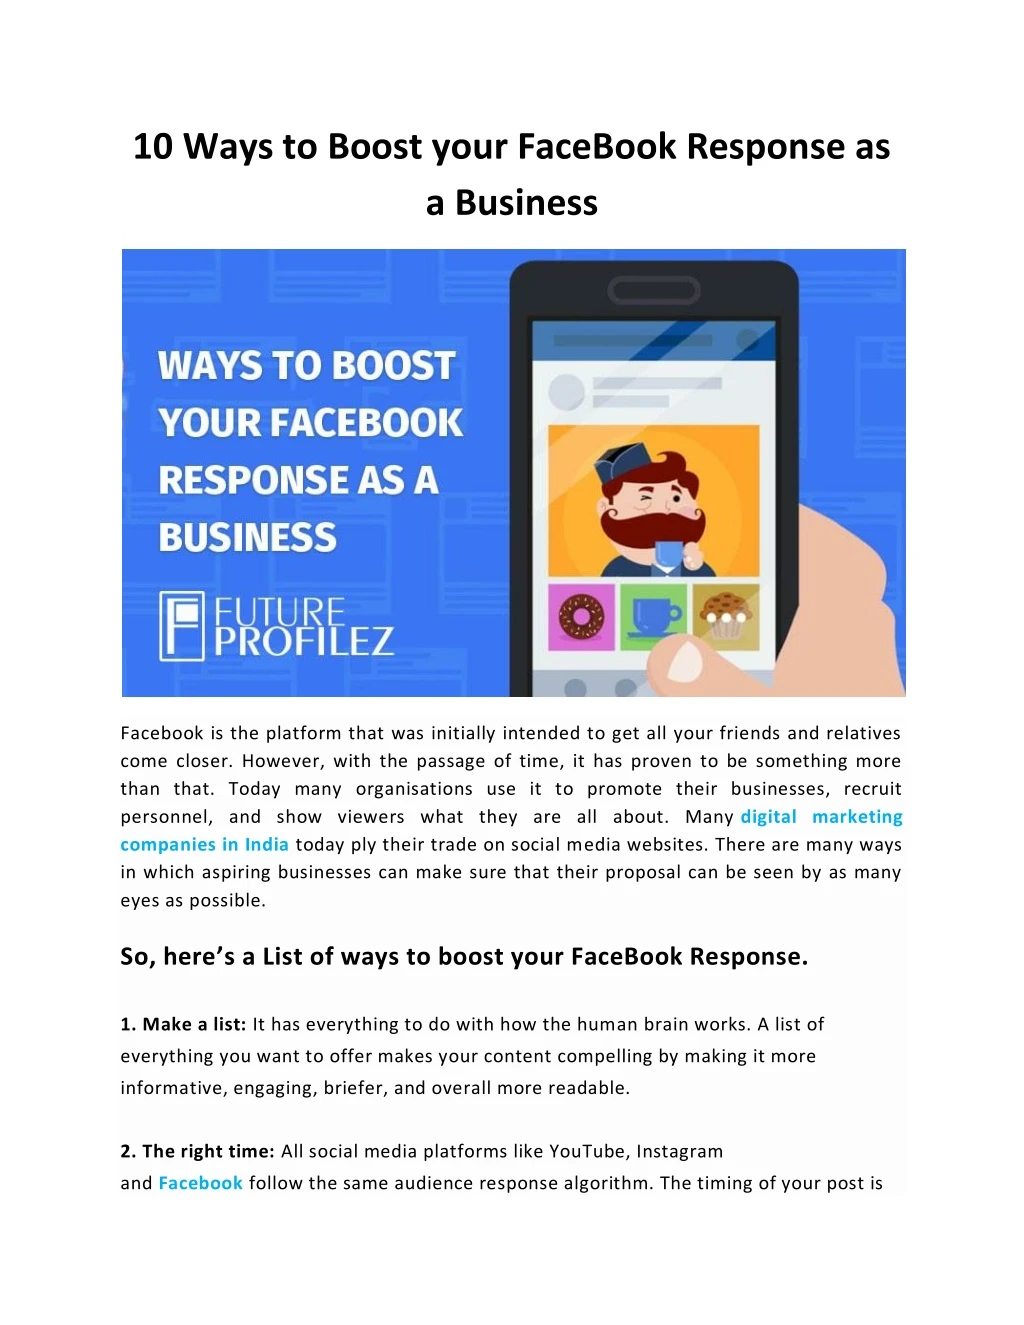 10 ways to boost your facebook response